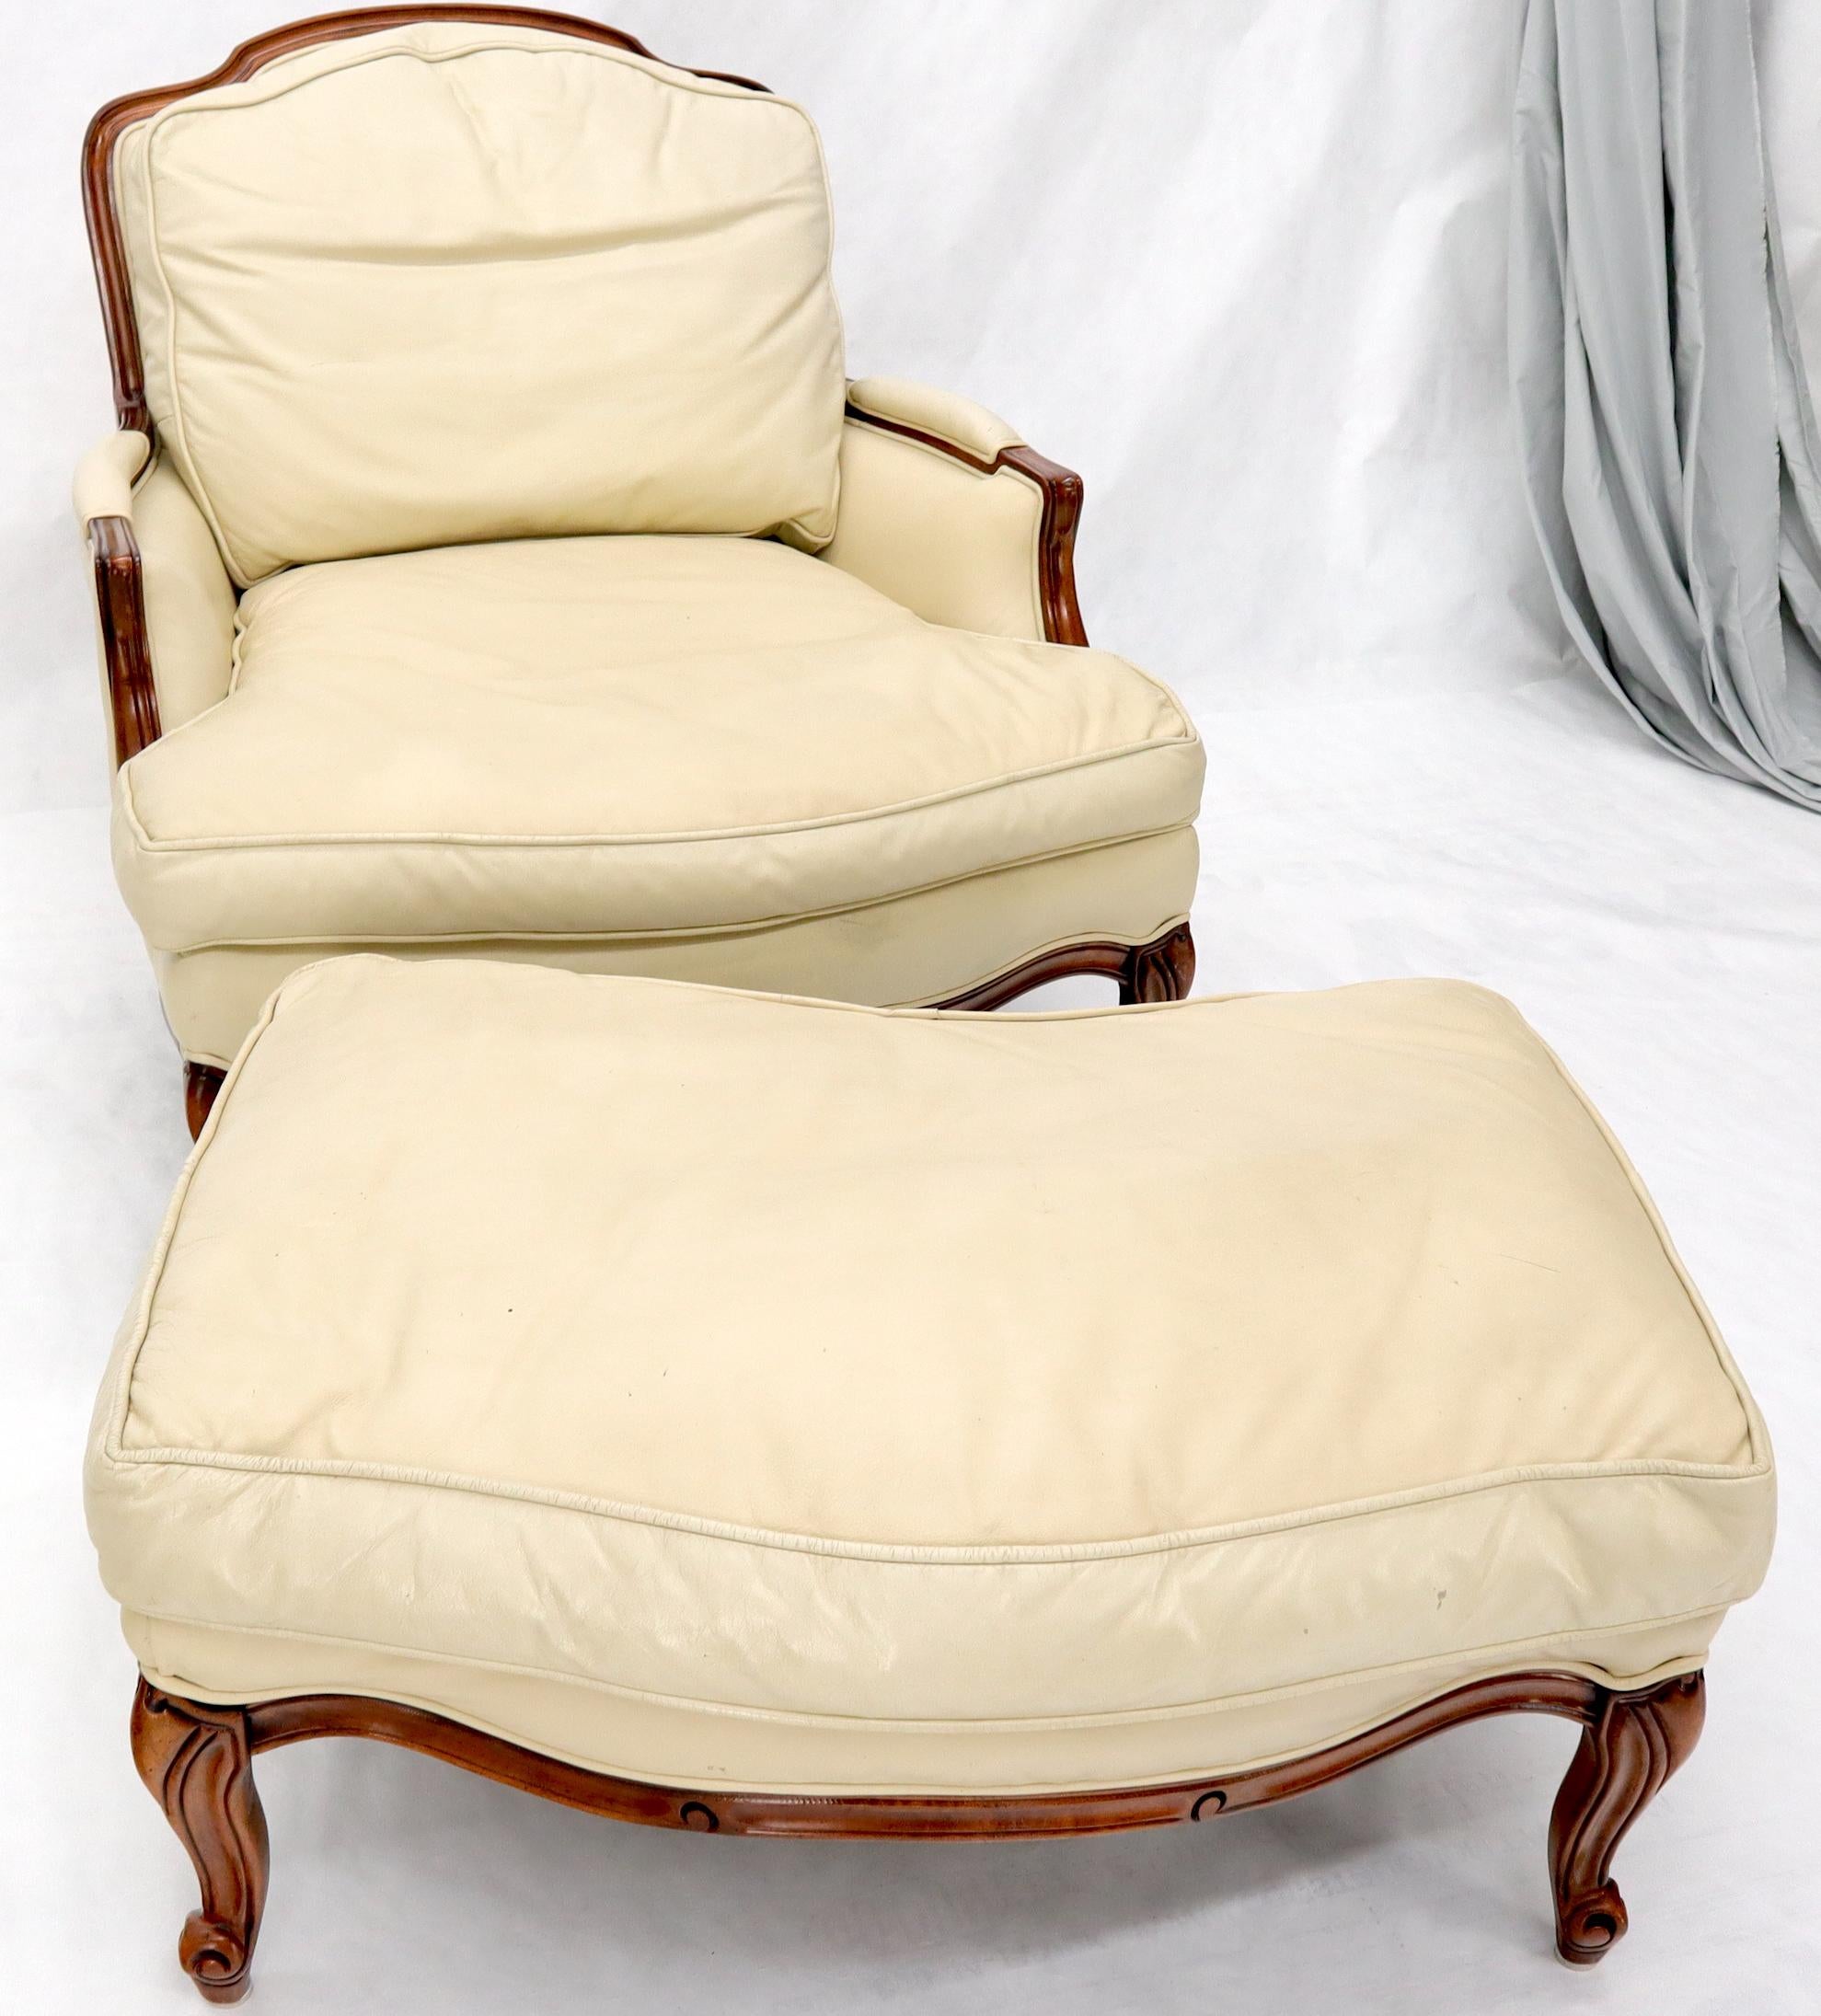 American Cream Leather Chaise 2-Part Chaise Lounge Chair and Ottoman